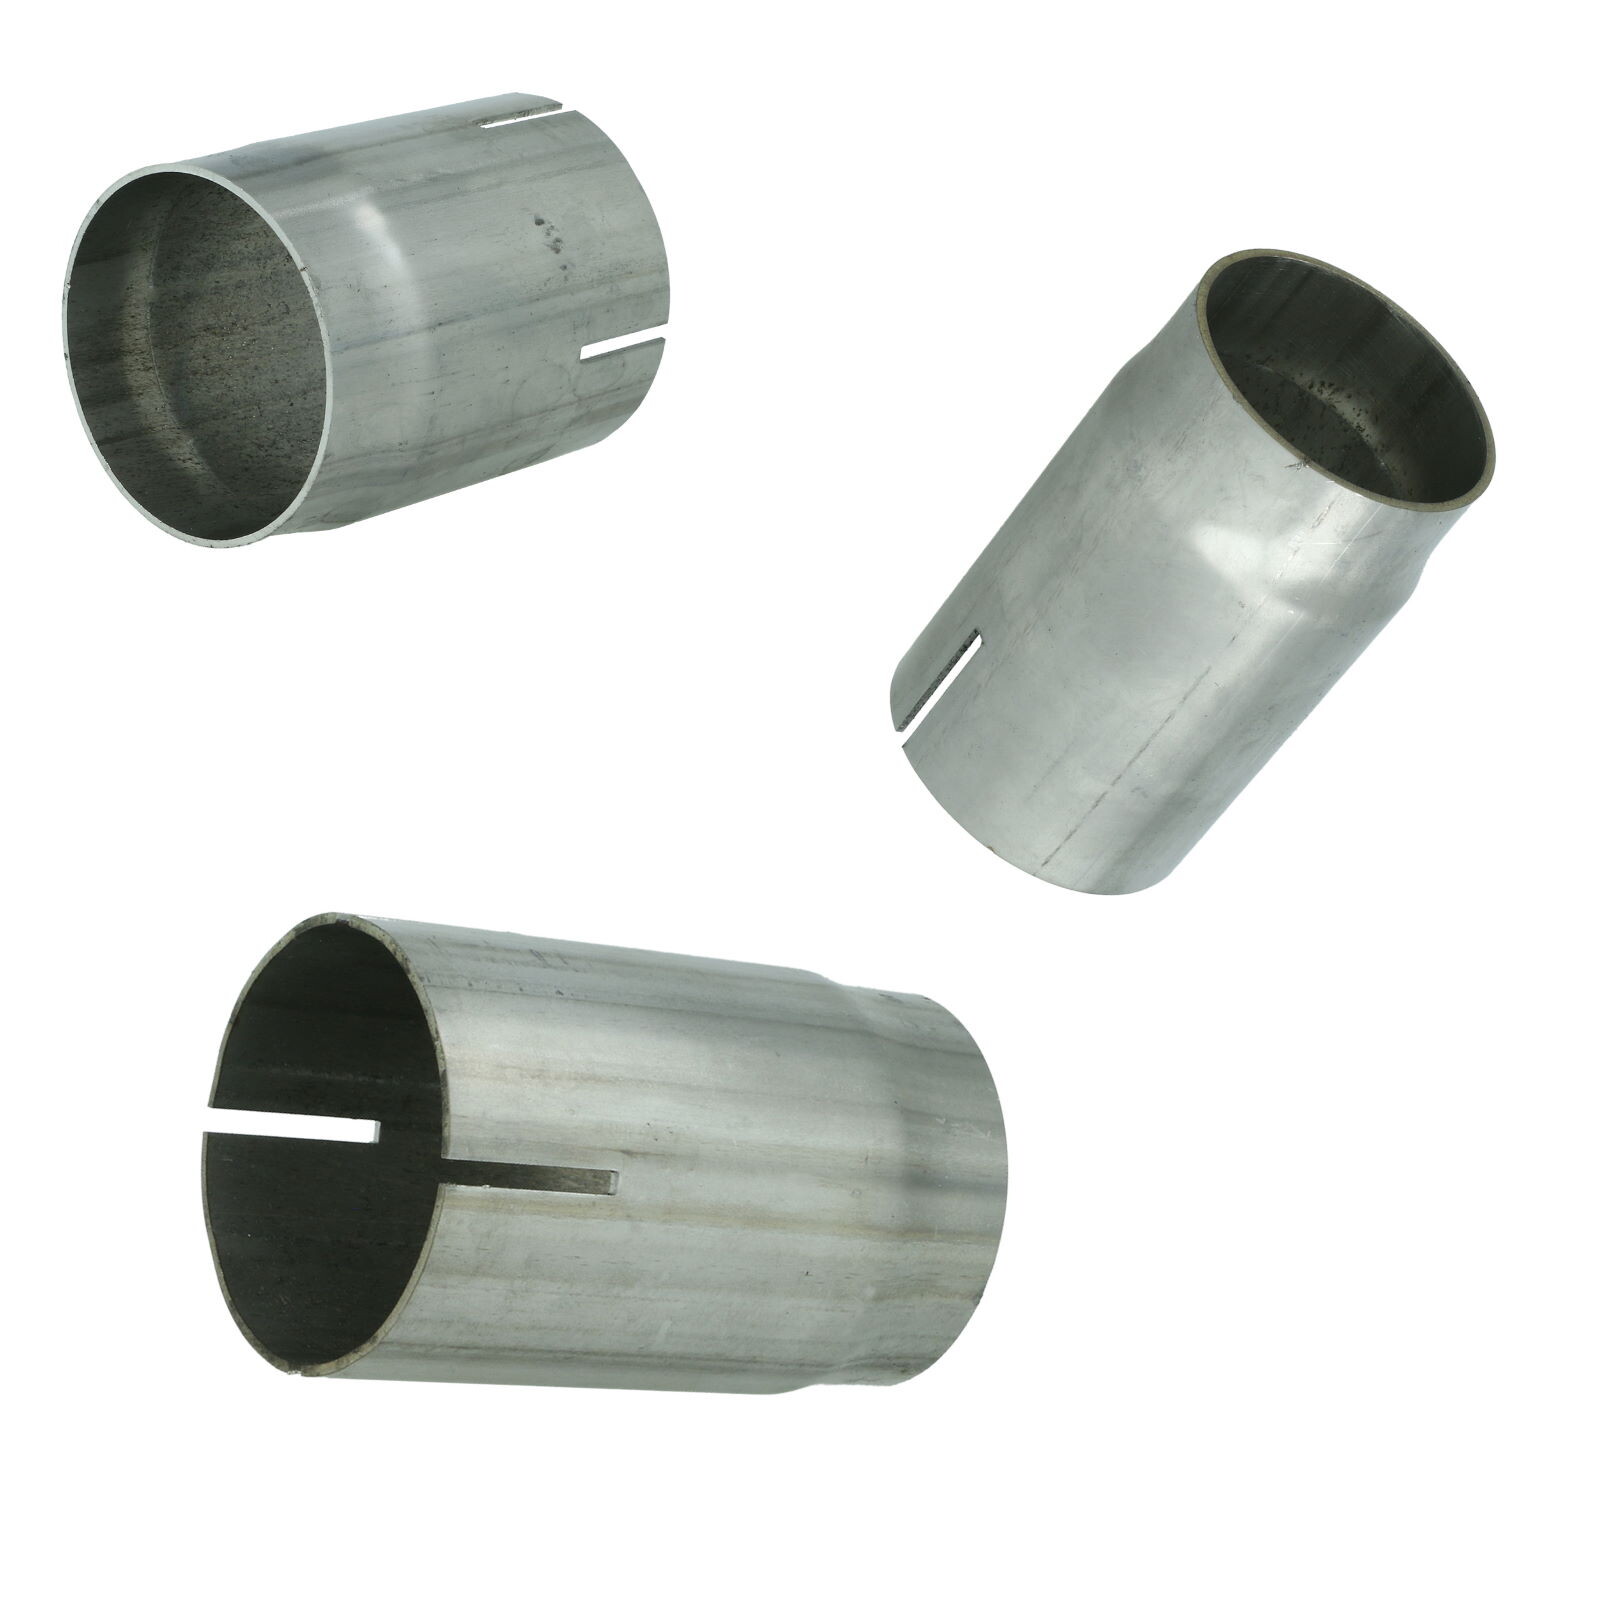 Stainless steel pipe sleeve connector for exhaust tubes and mufflers